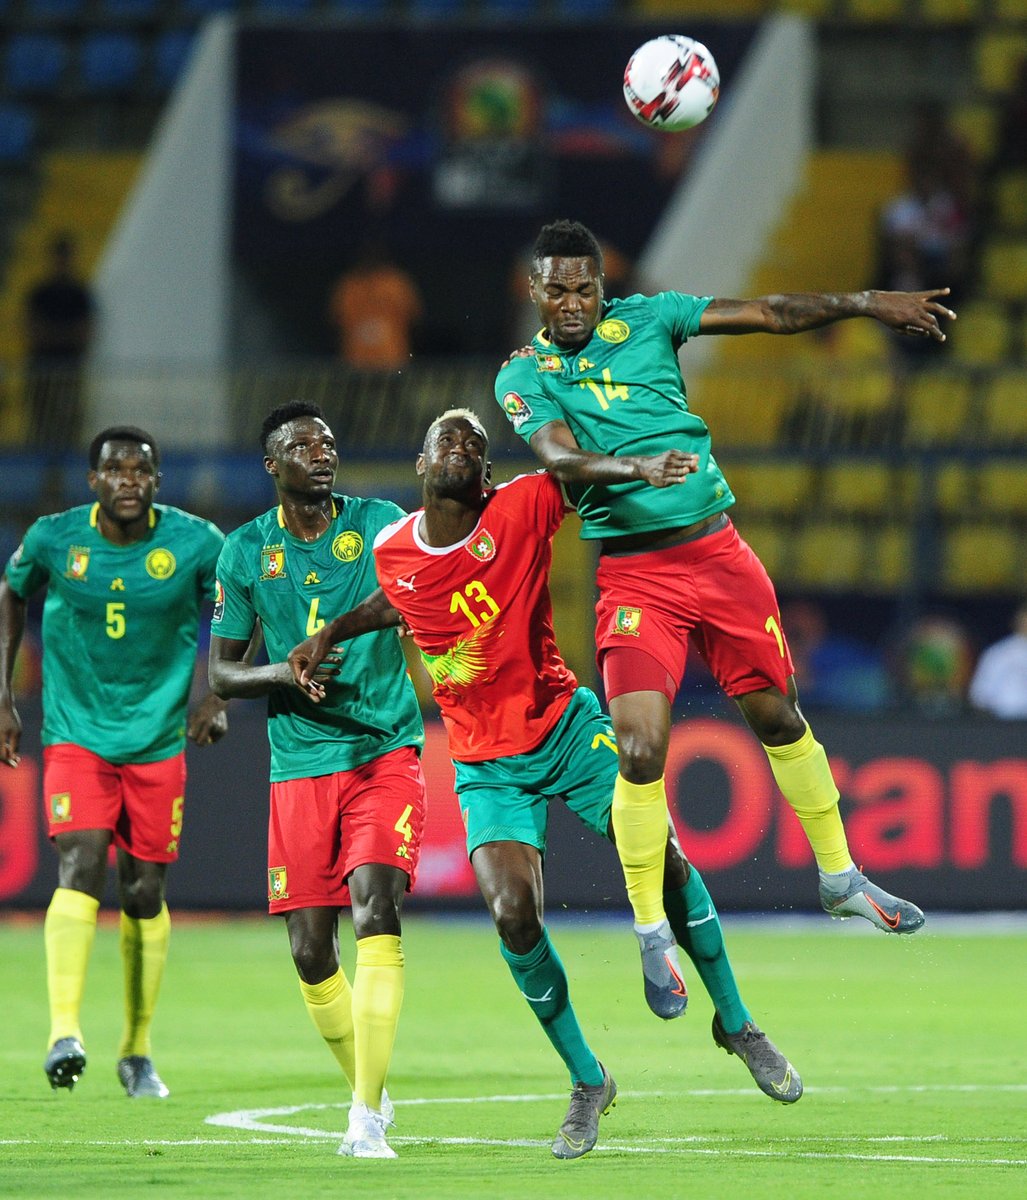 WATCH: AFCON 2019: Defending Champions Cameroon cruise past Guinea-Bissau